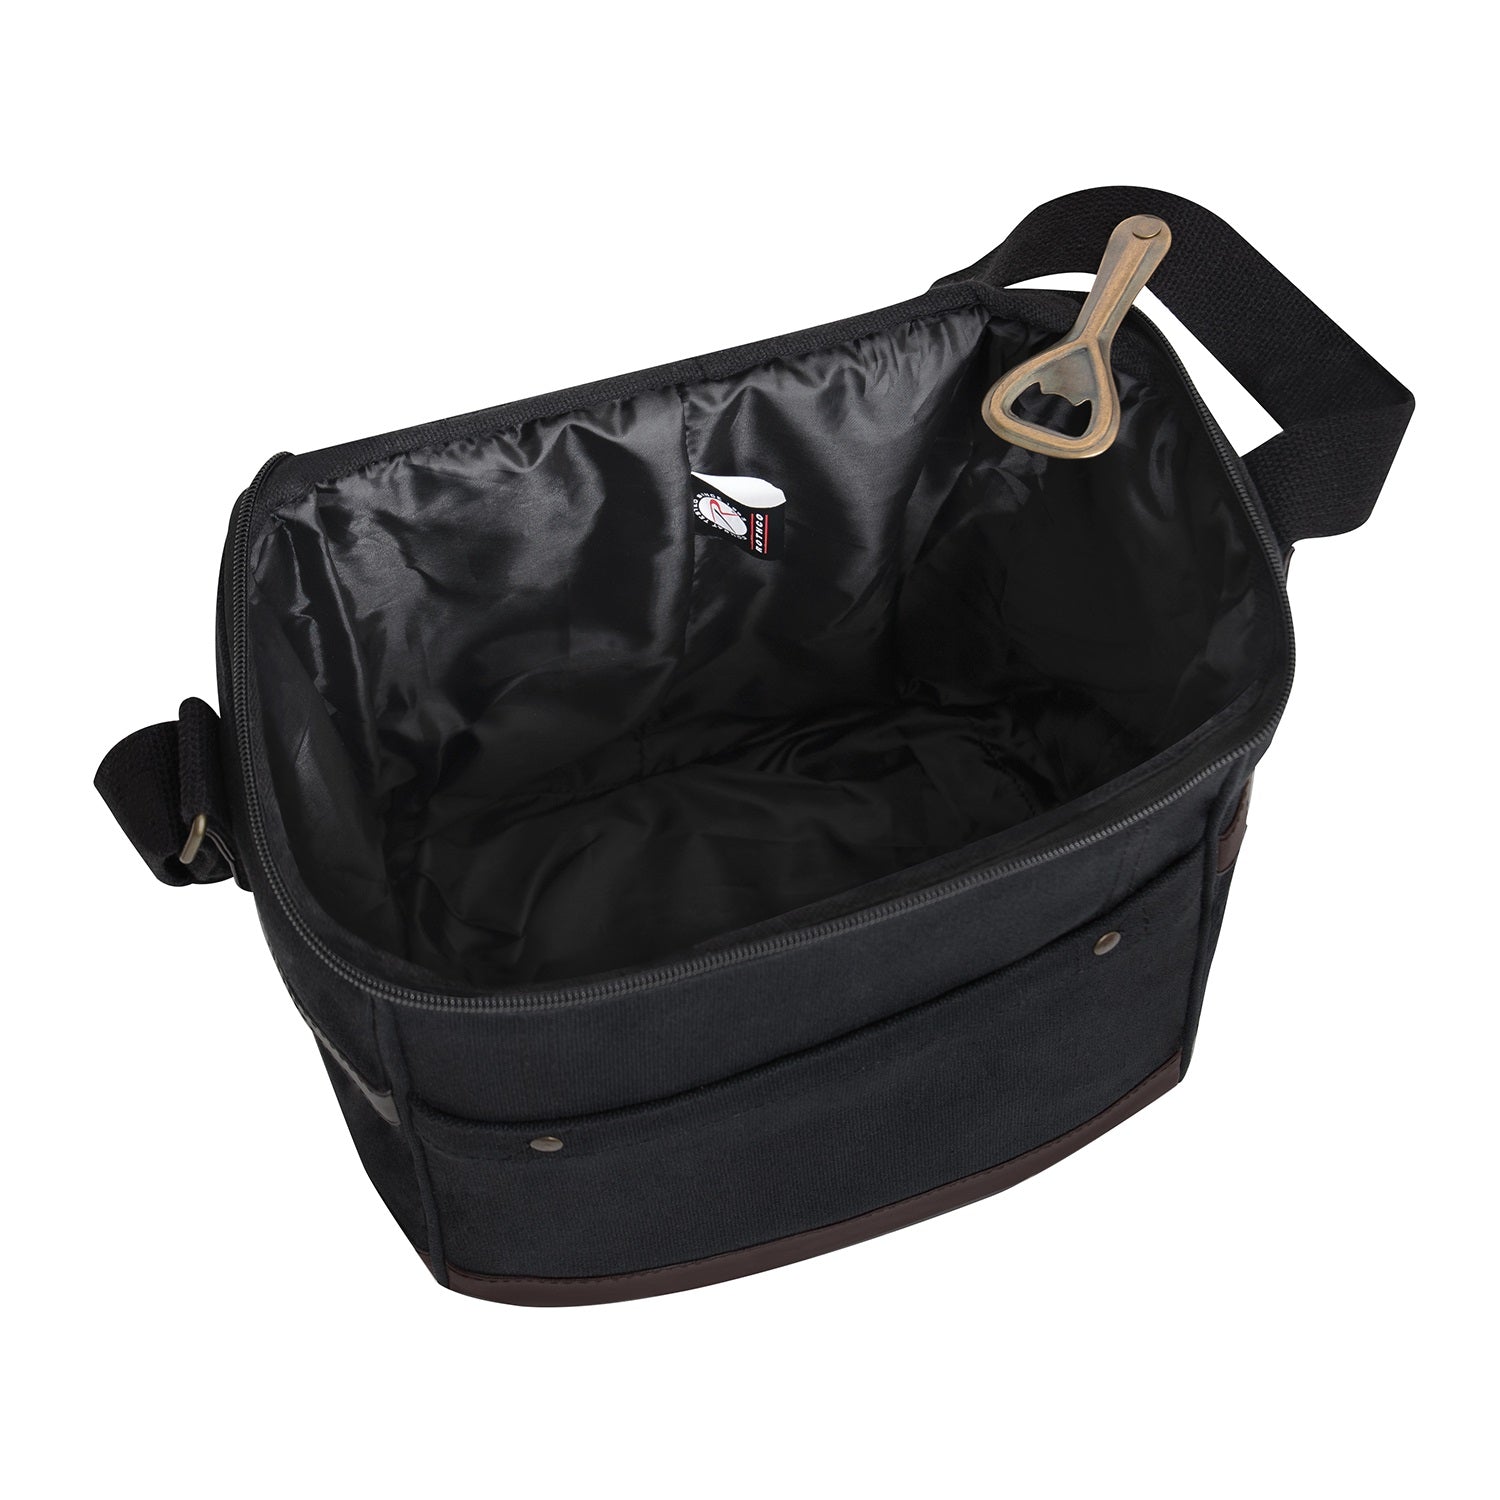 Rothco Canvas Insulated Cooler Bag Black